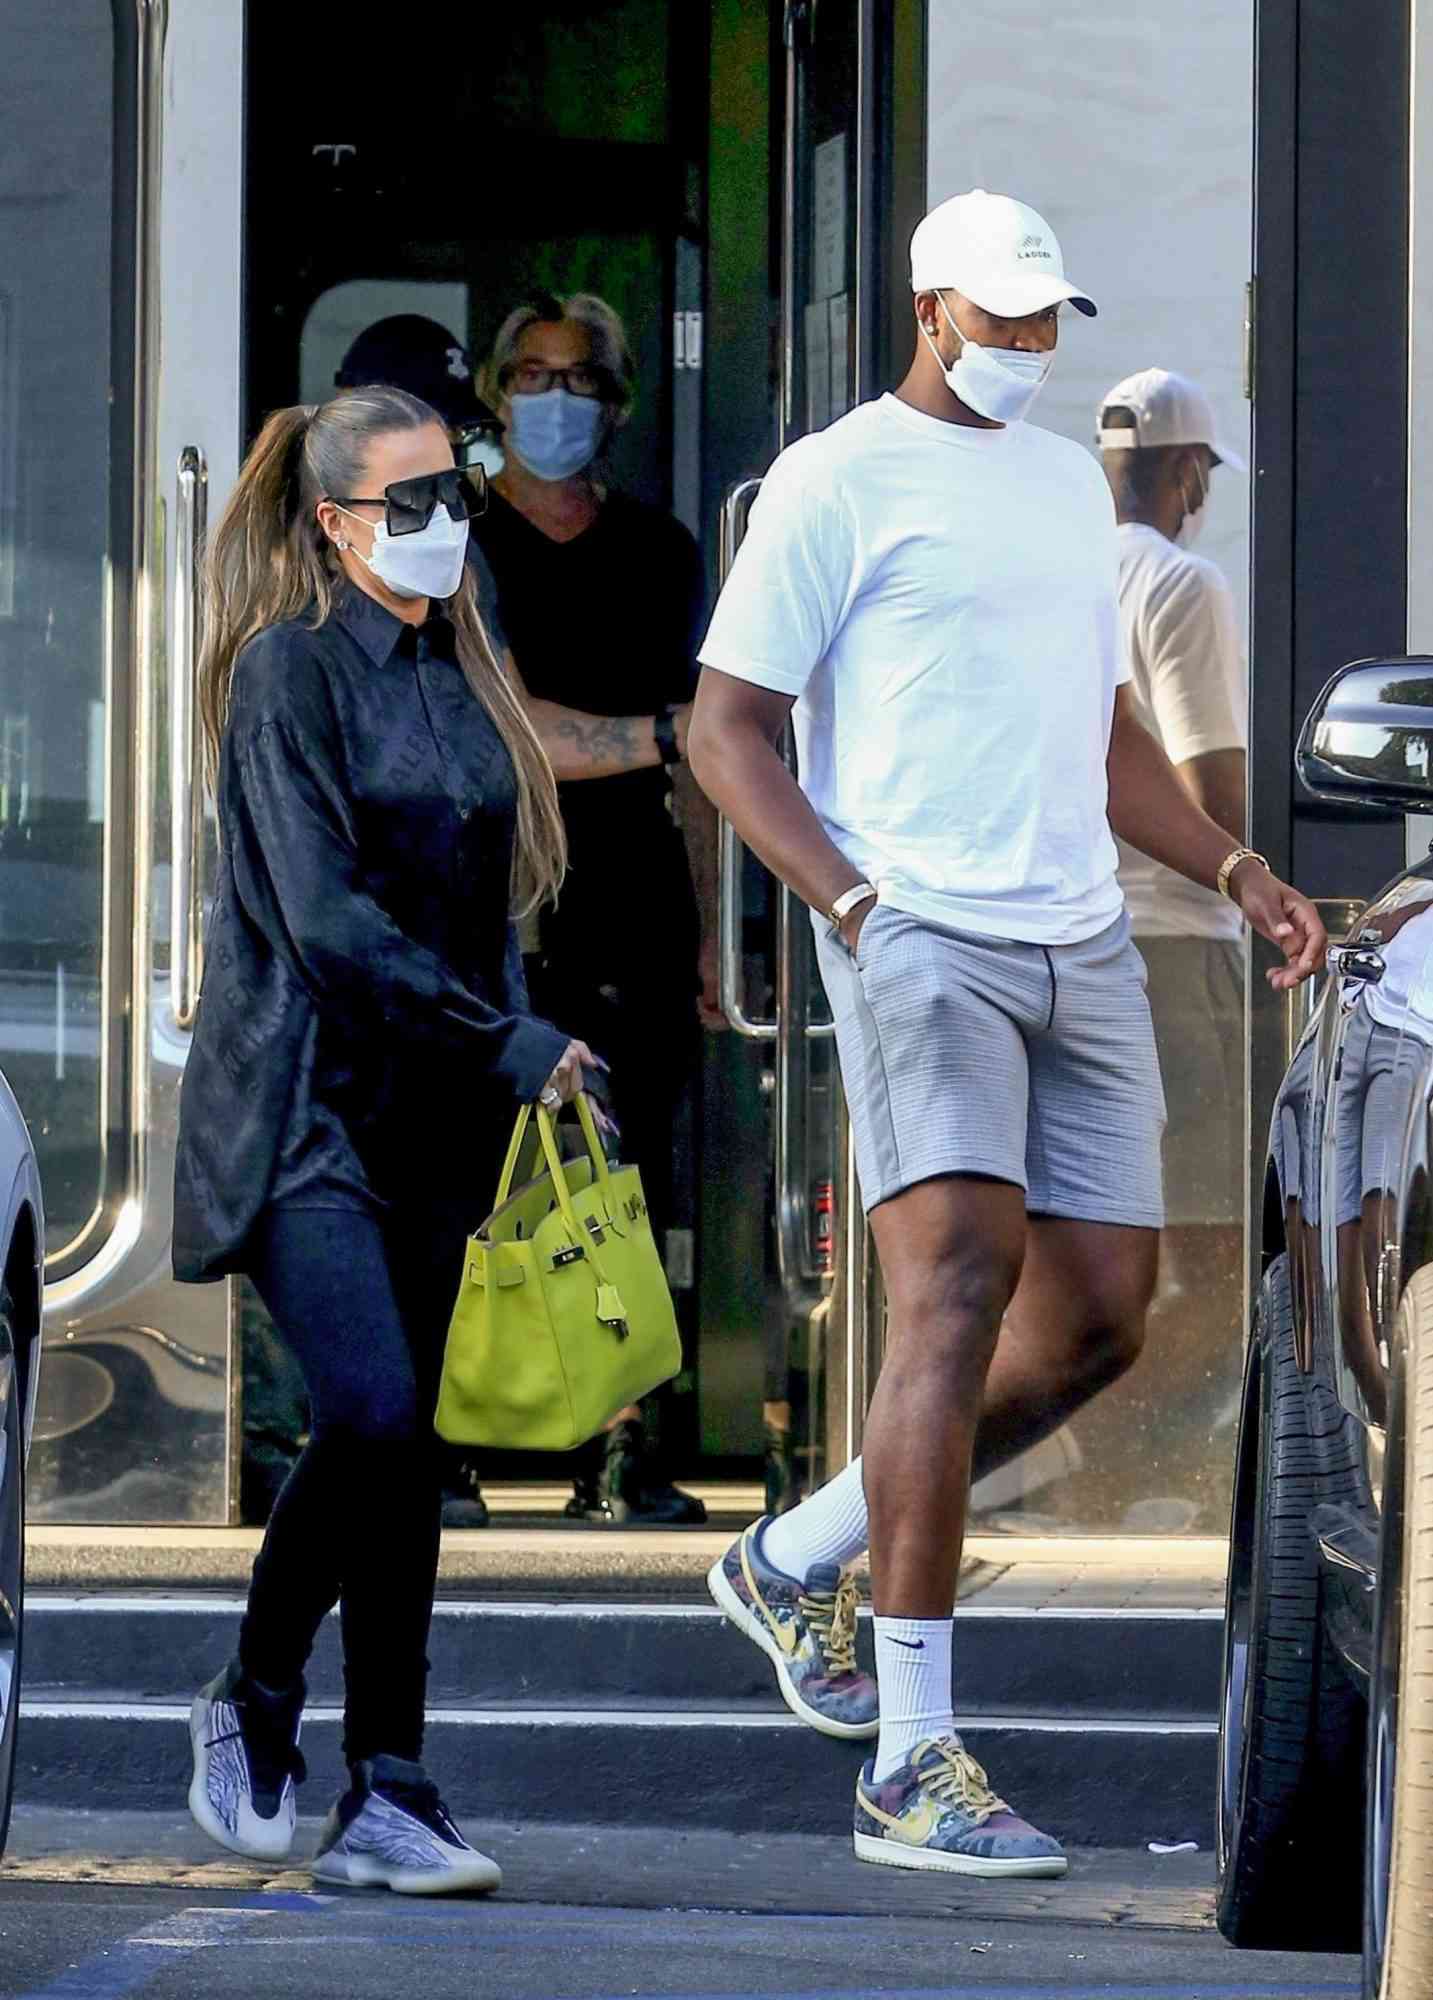 Khloe Kardashian and Tristan Thompson return to their Rolls Royce after some shopping at XIV Karats Ltd in Beverly Hills